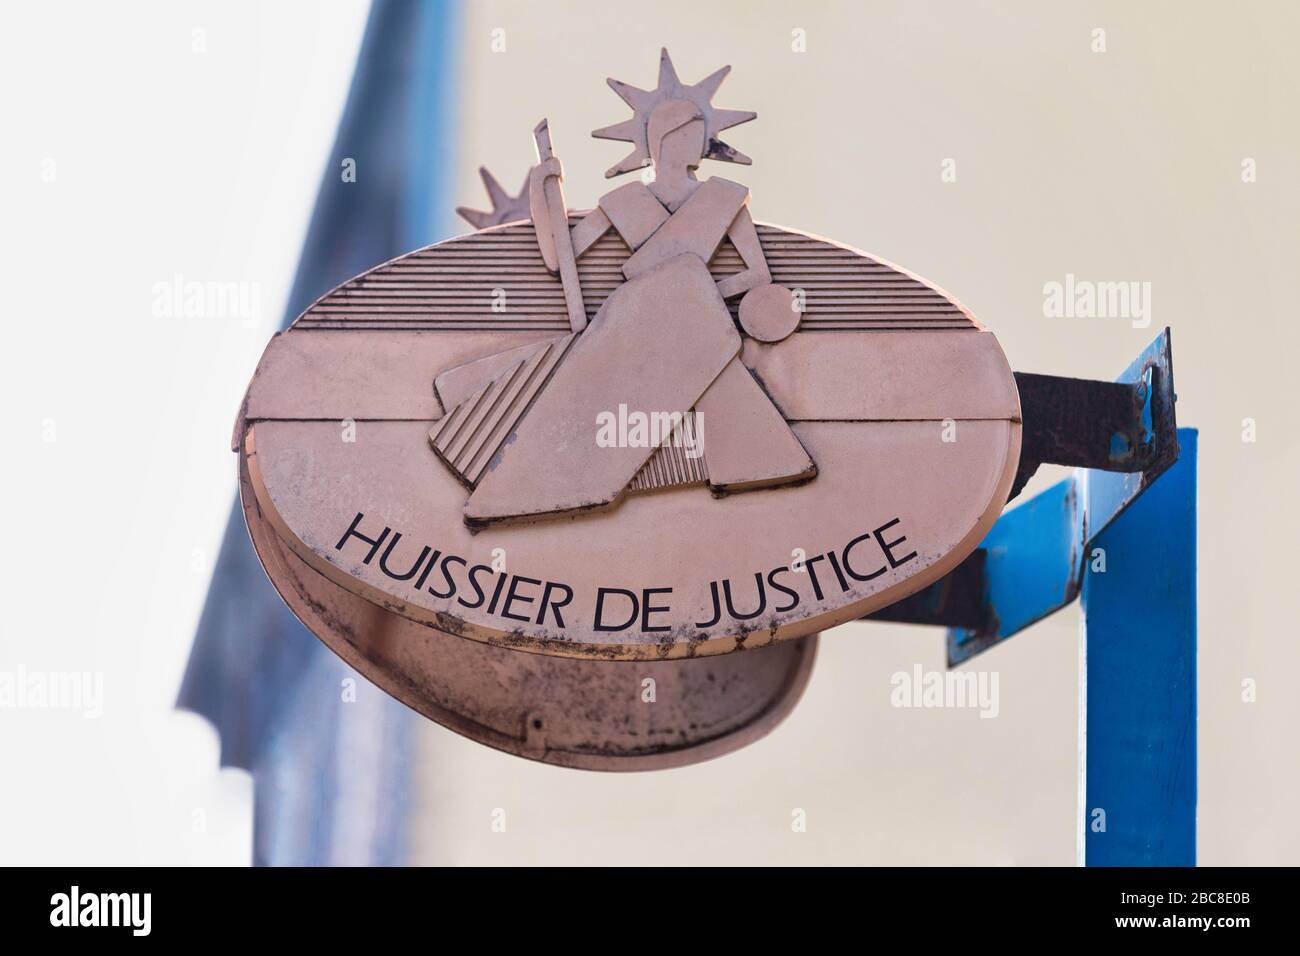 Signboard on building of a Huissier de justice (bailiff) in Paris, France. Stock Photo